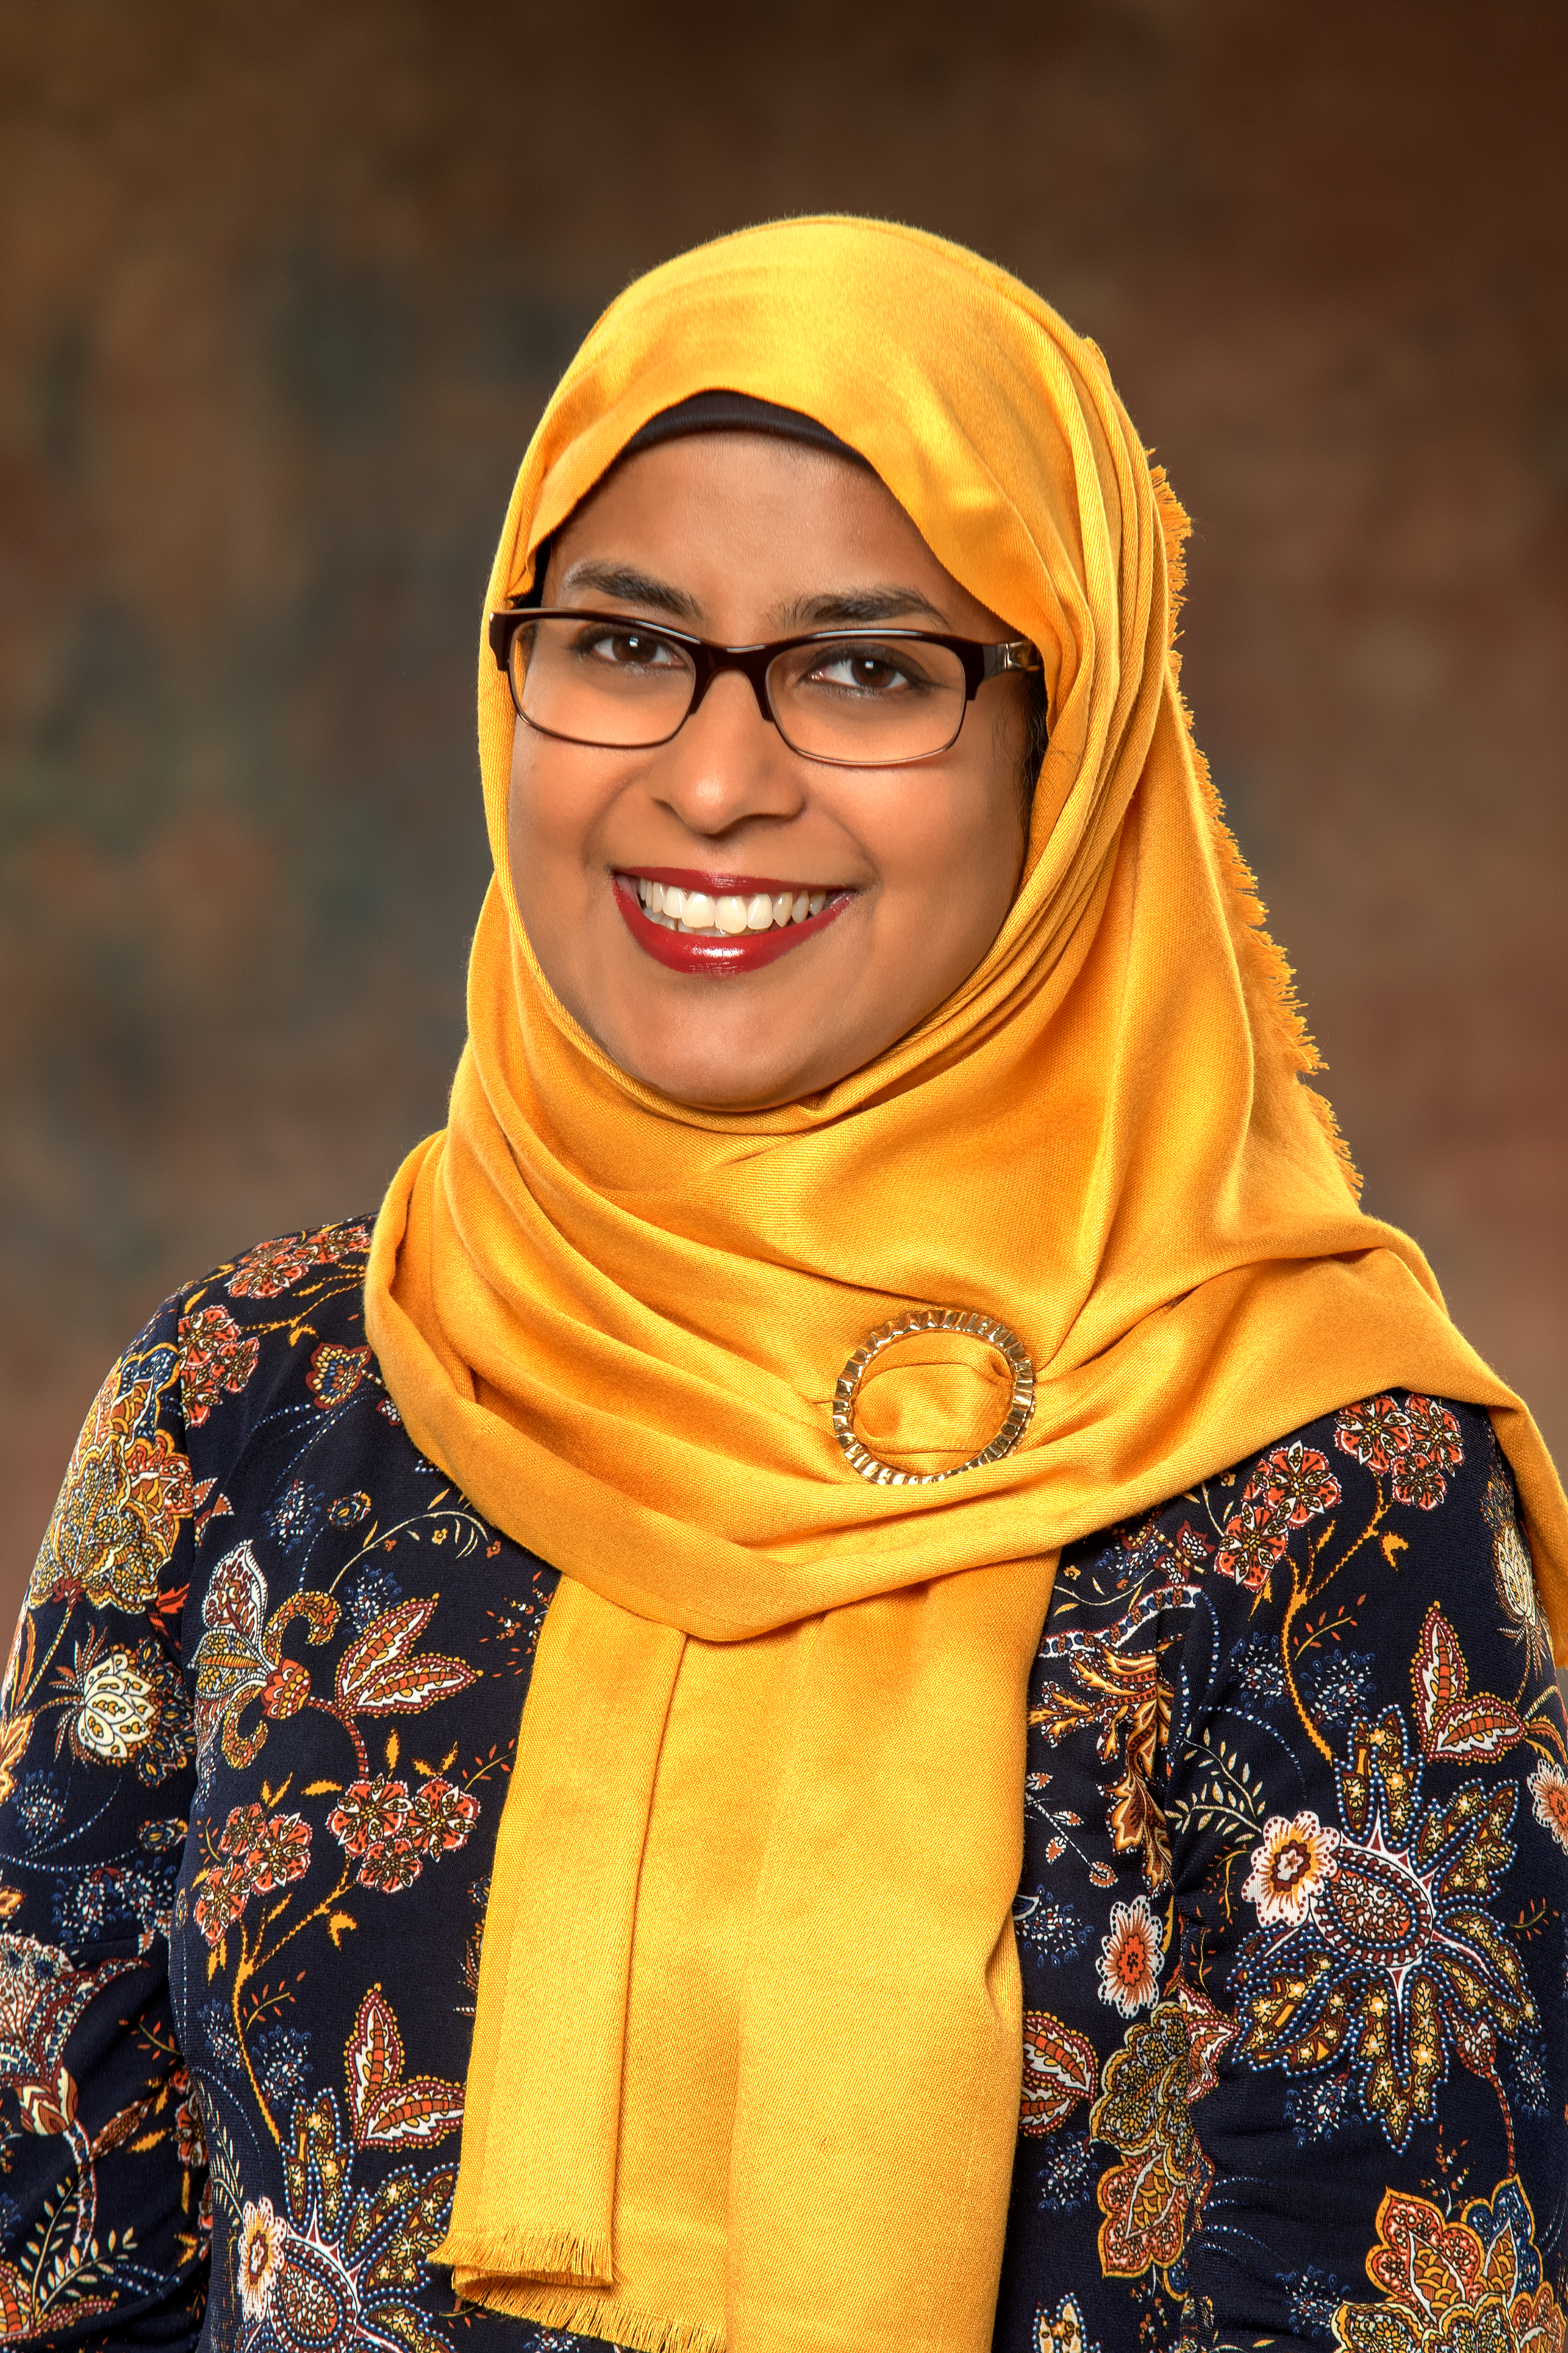 a profile picture of Sabina Mohyuddin, a speaker at the conference.